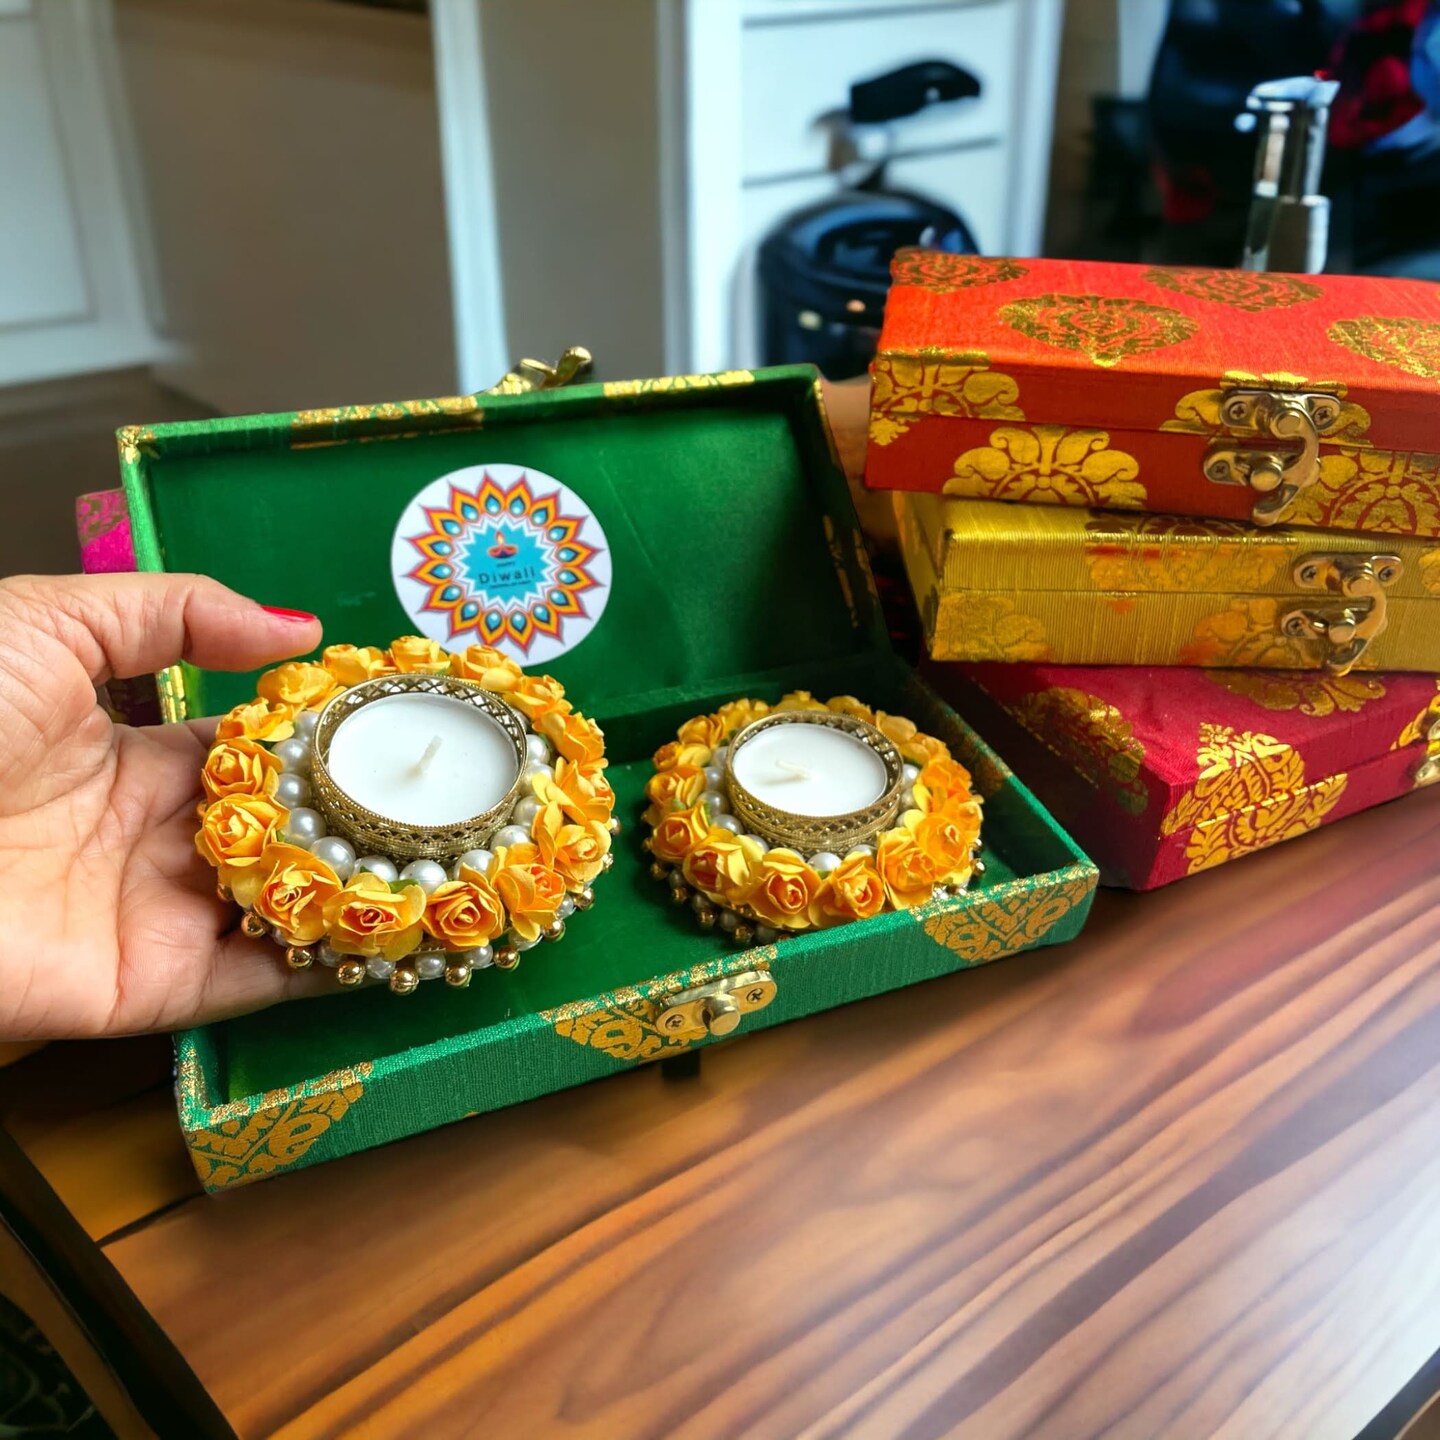 15 Unique Gifts This Diwali That Are Light on the Pocket - moneyview